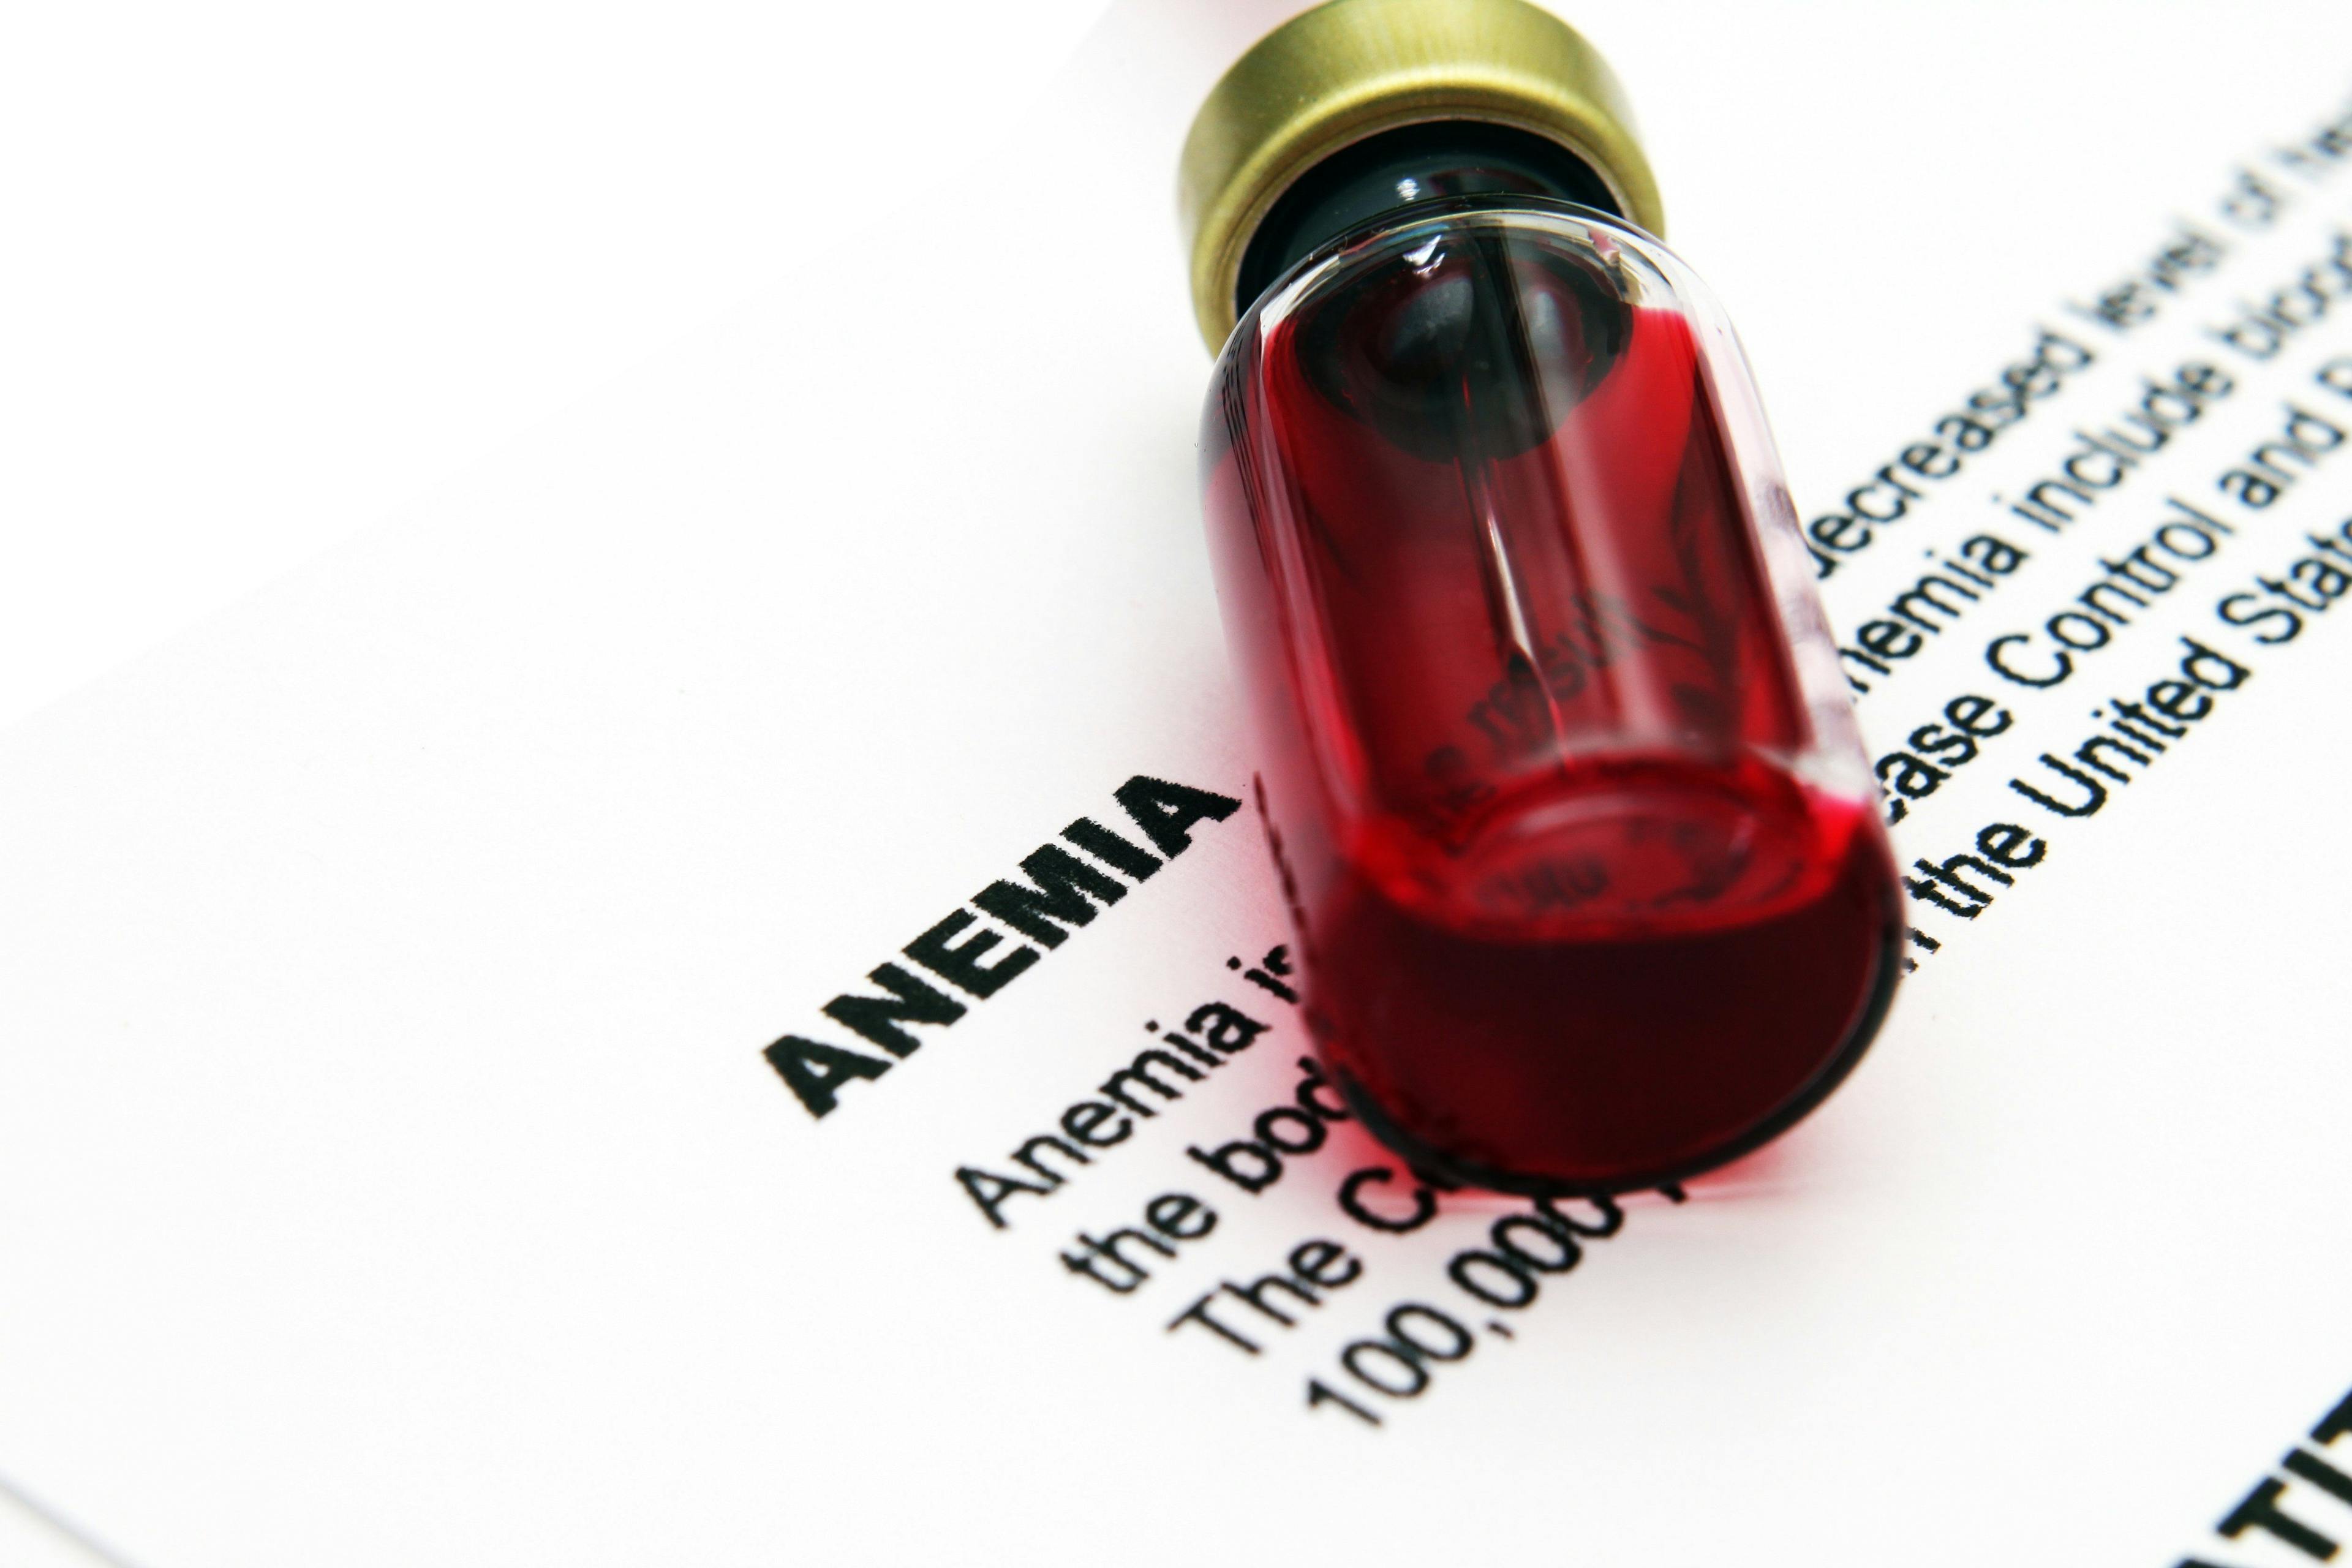 FDA Approves Luspatercept to Treat Anemia in Patients with Lower-Risk MDS